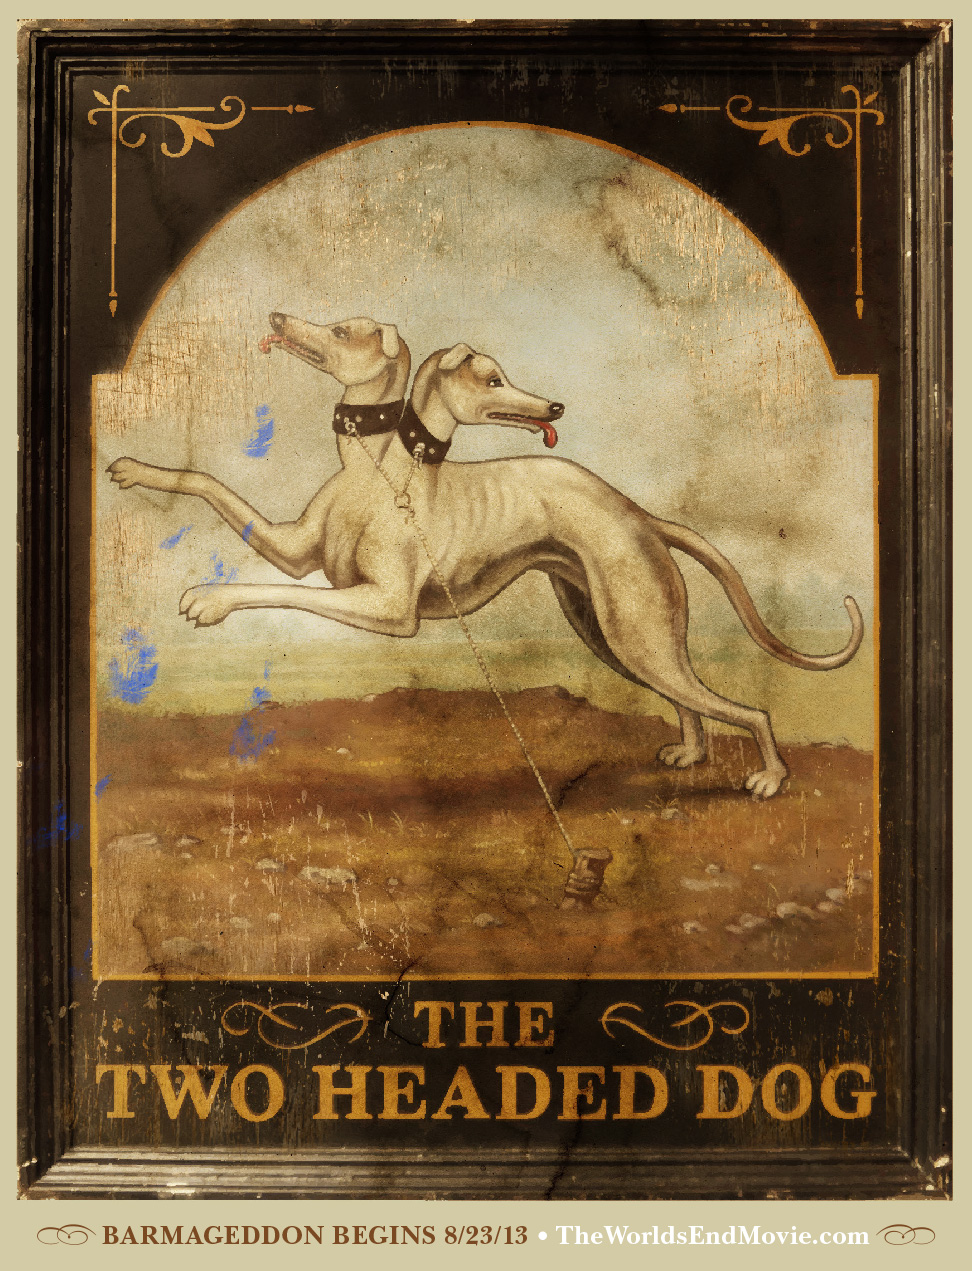 worlds-end-pub-sign-two-headed-dog.jpg